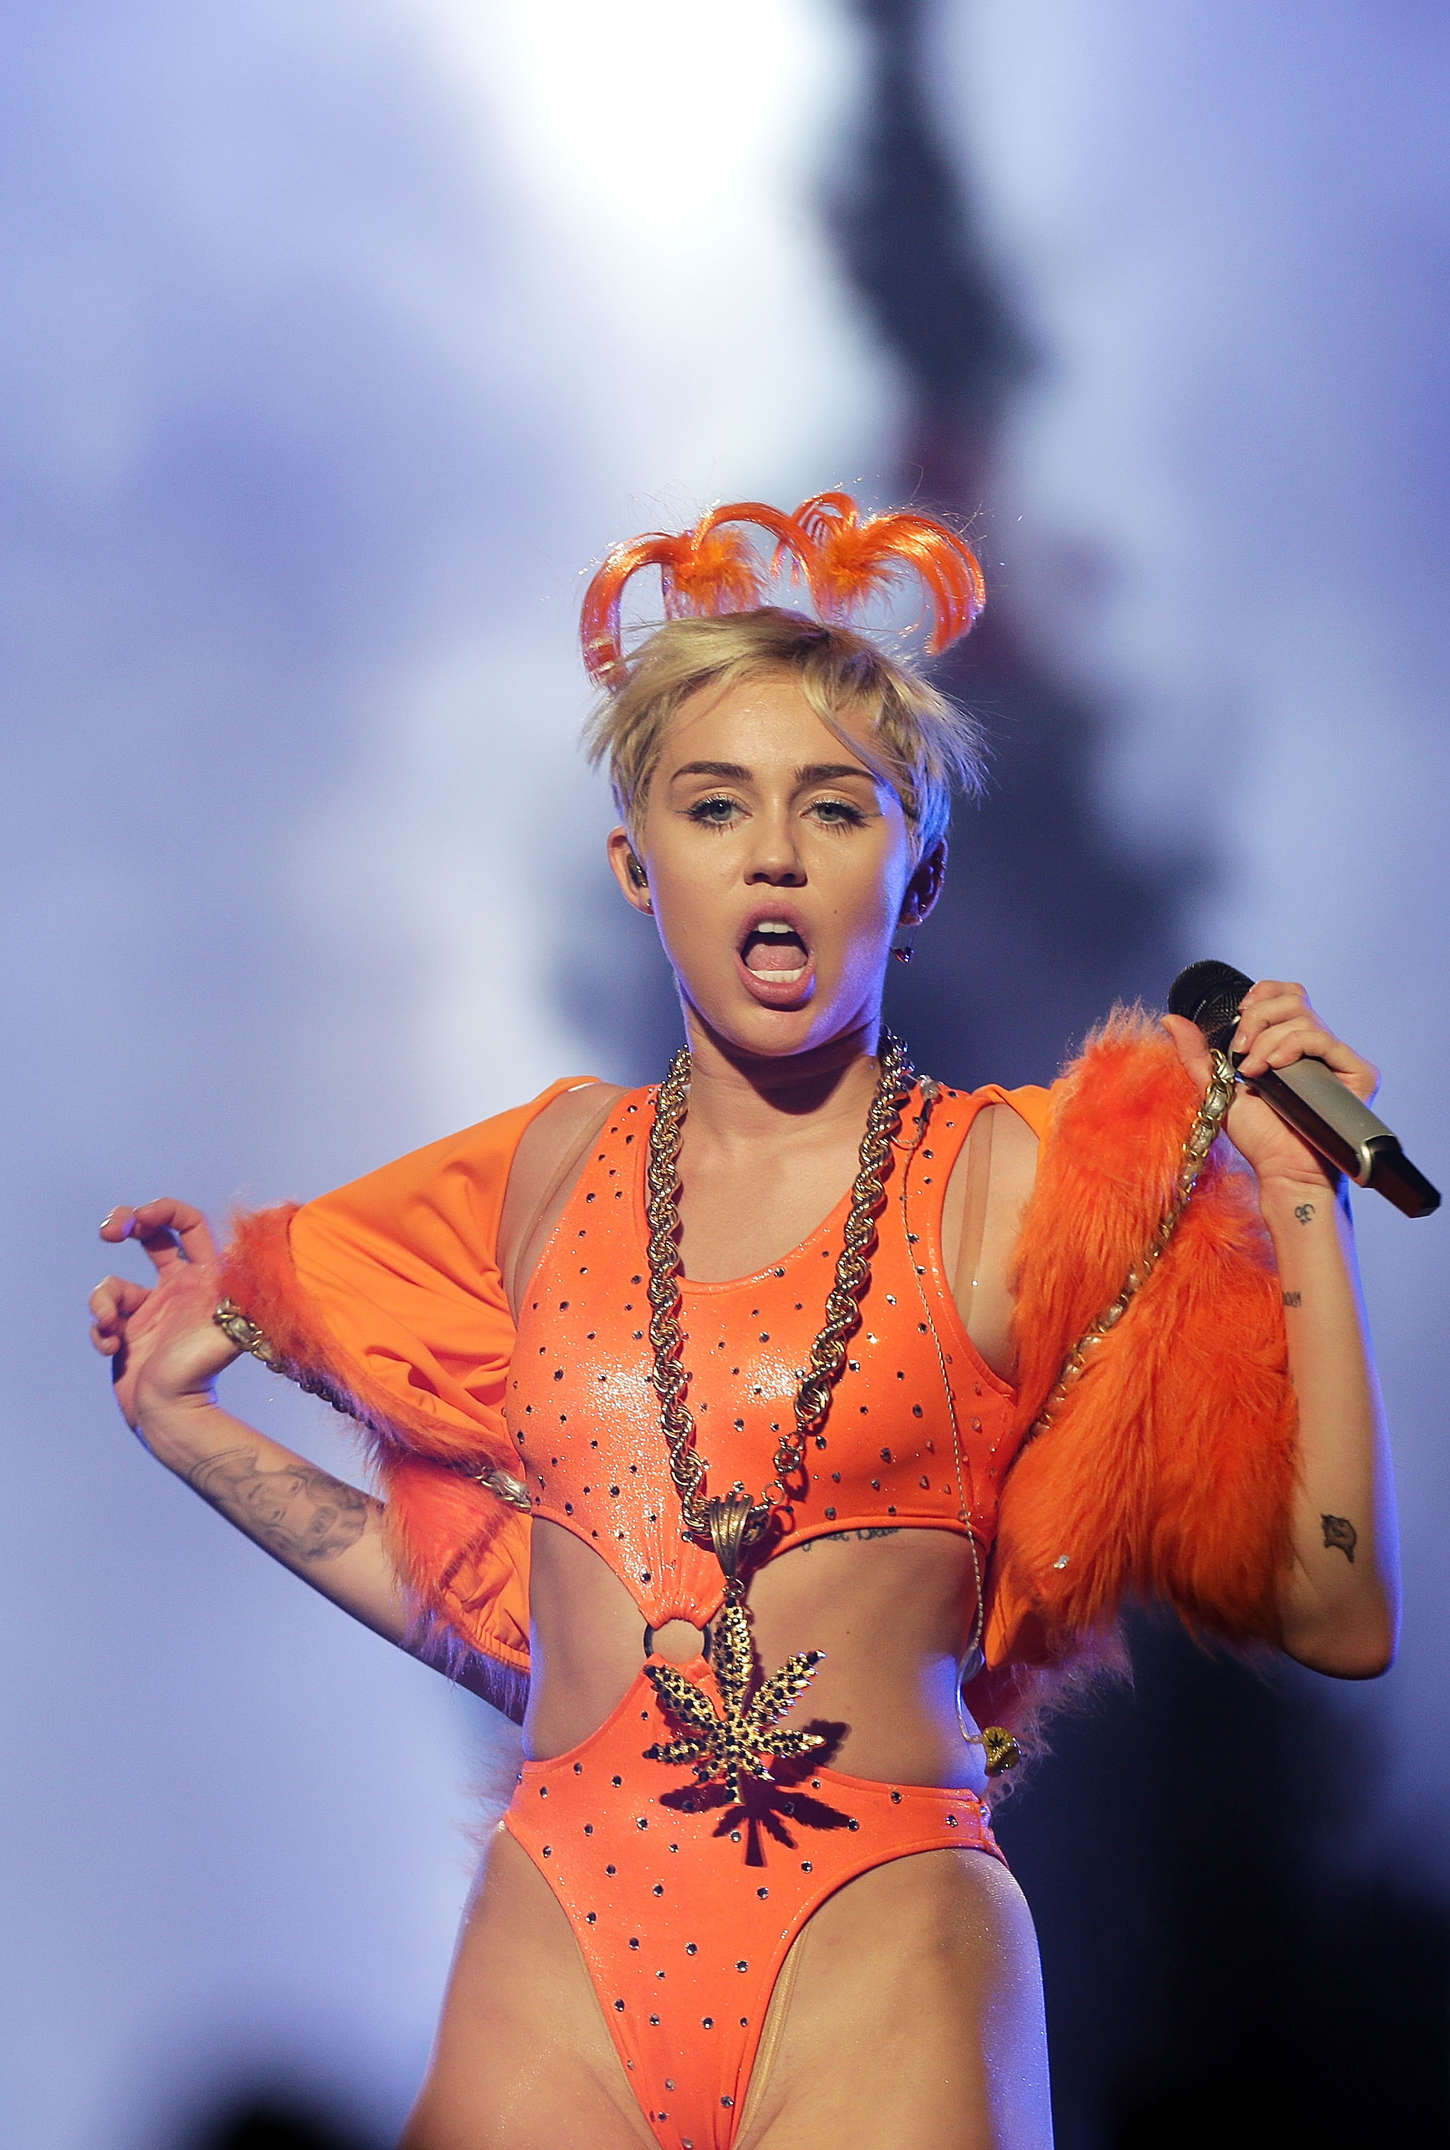 miley cyrus going on tour